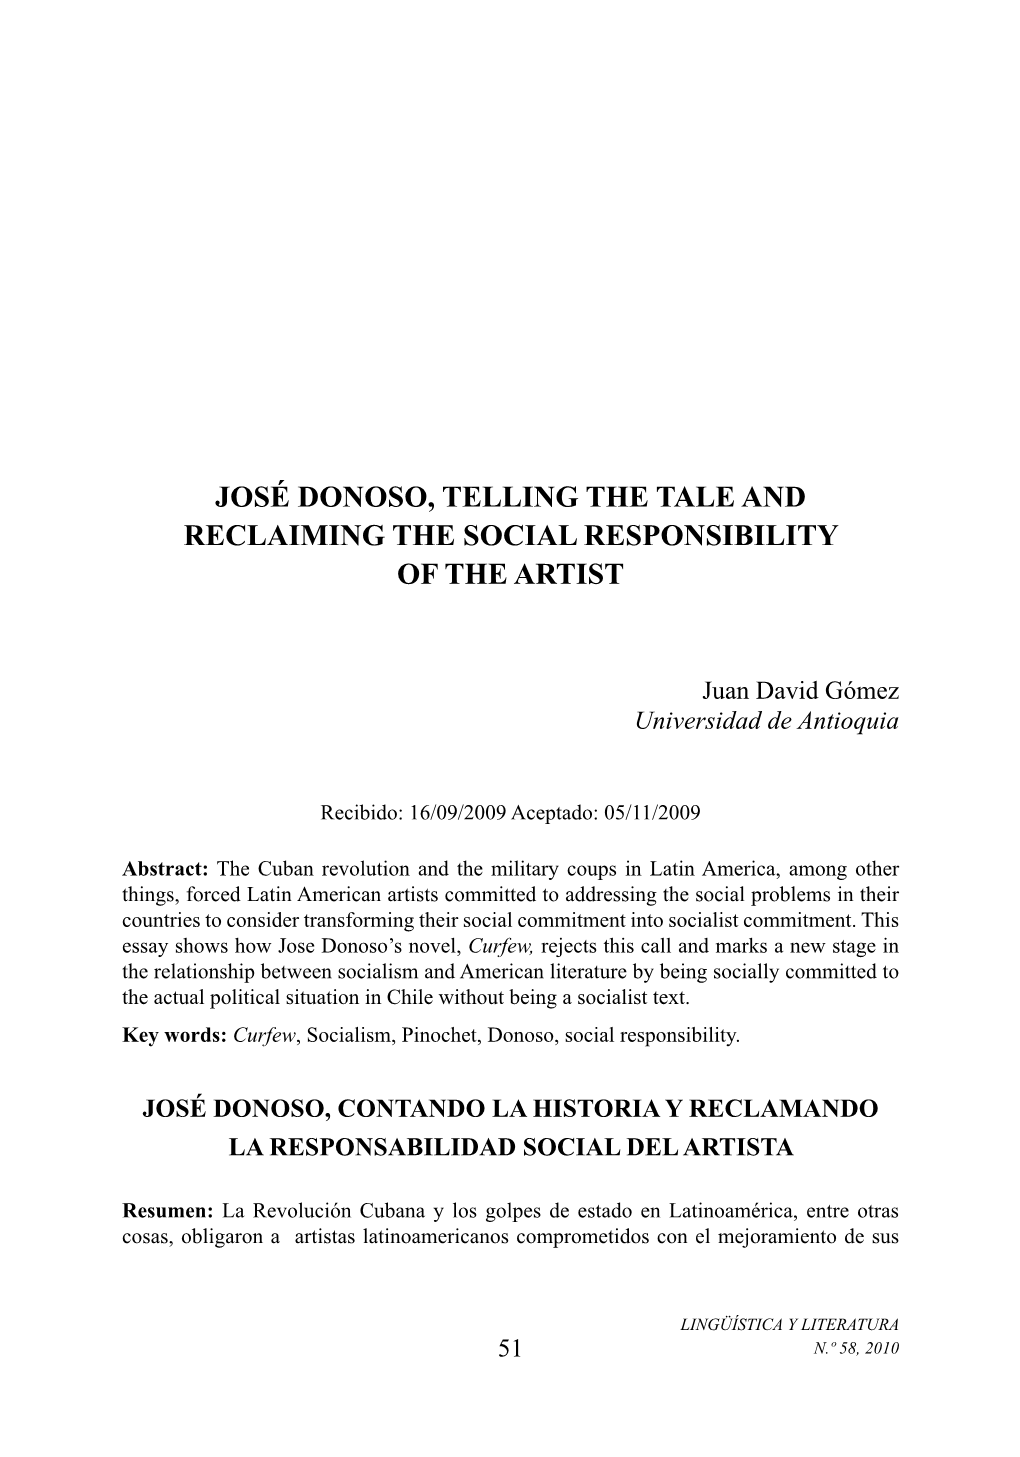 José Donoso, Telling the Tale and Reclaiming the Social Responsibility of the Artist